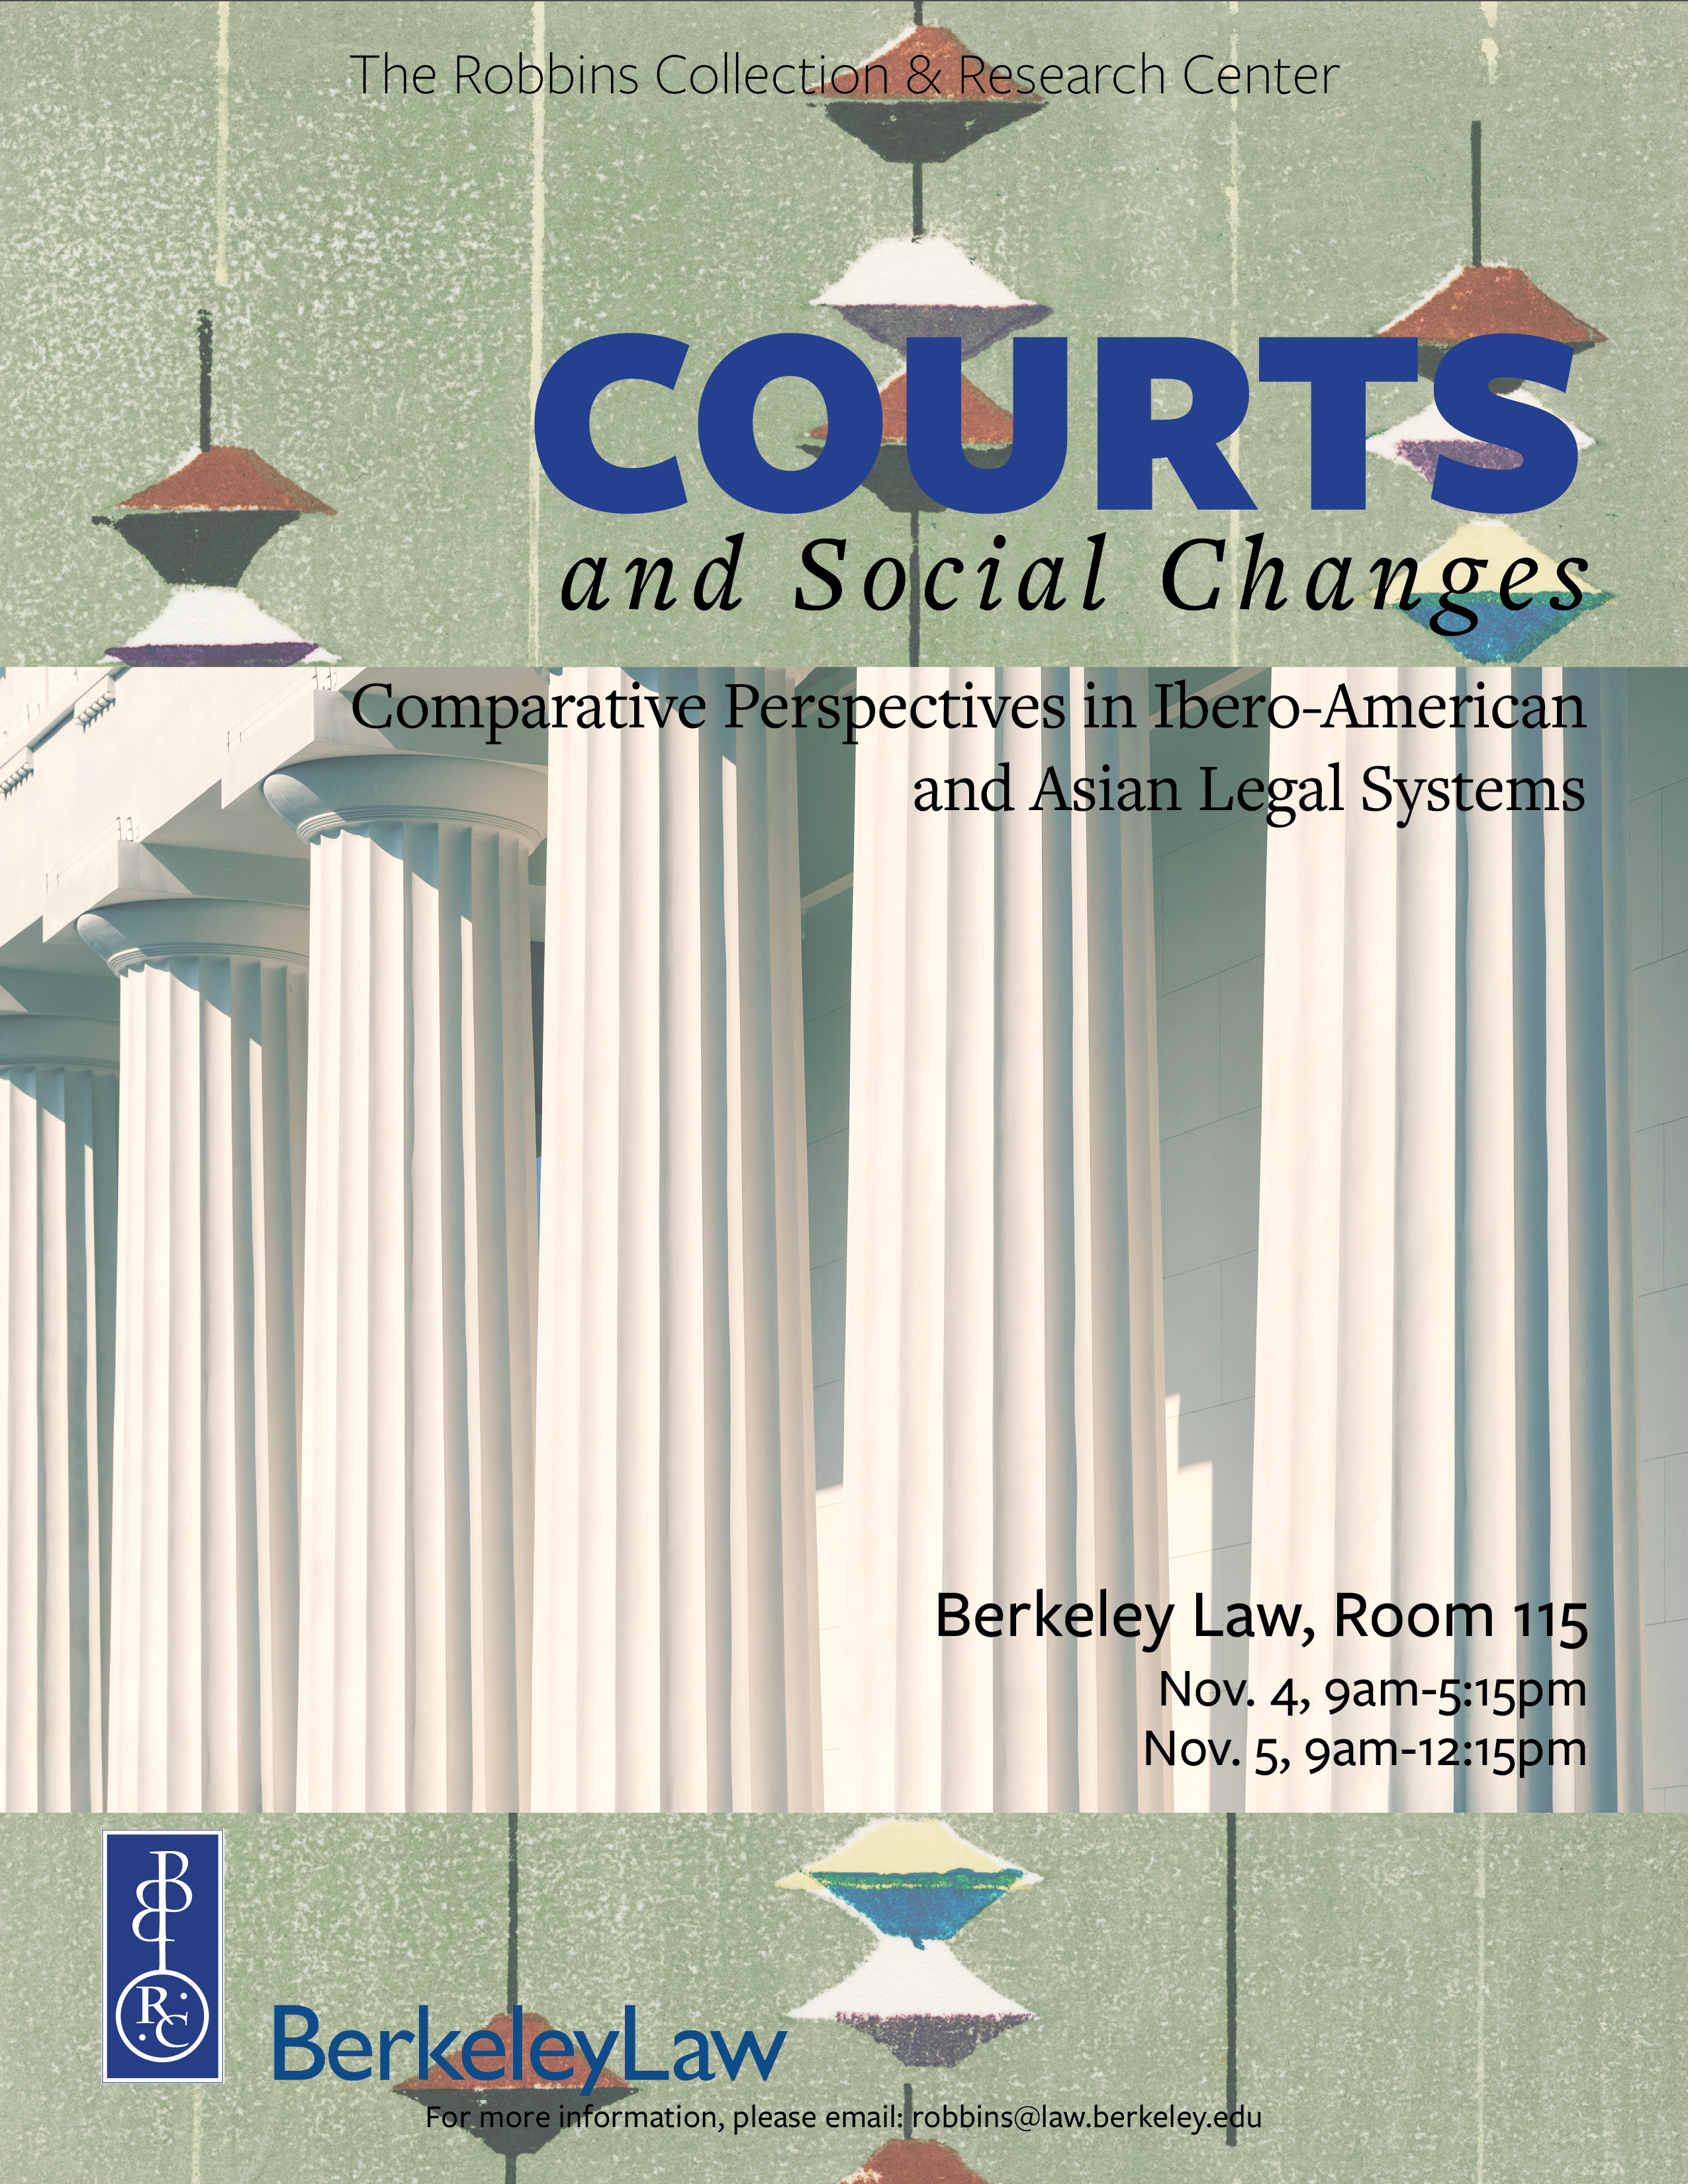 Poster for the Courts and Social Changes conference